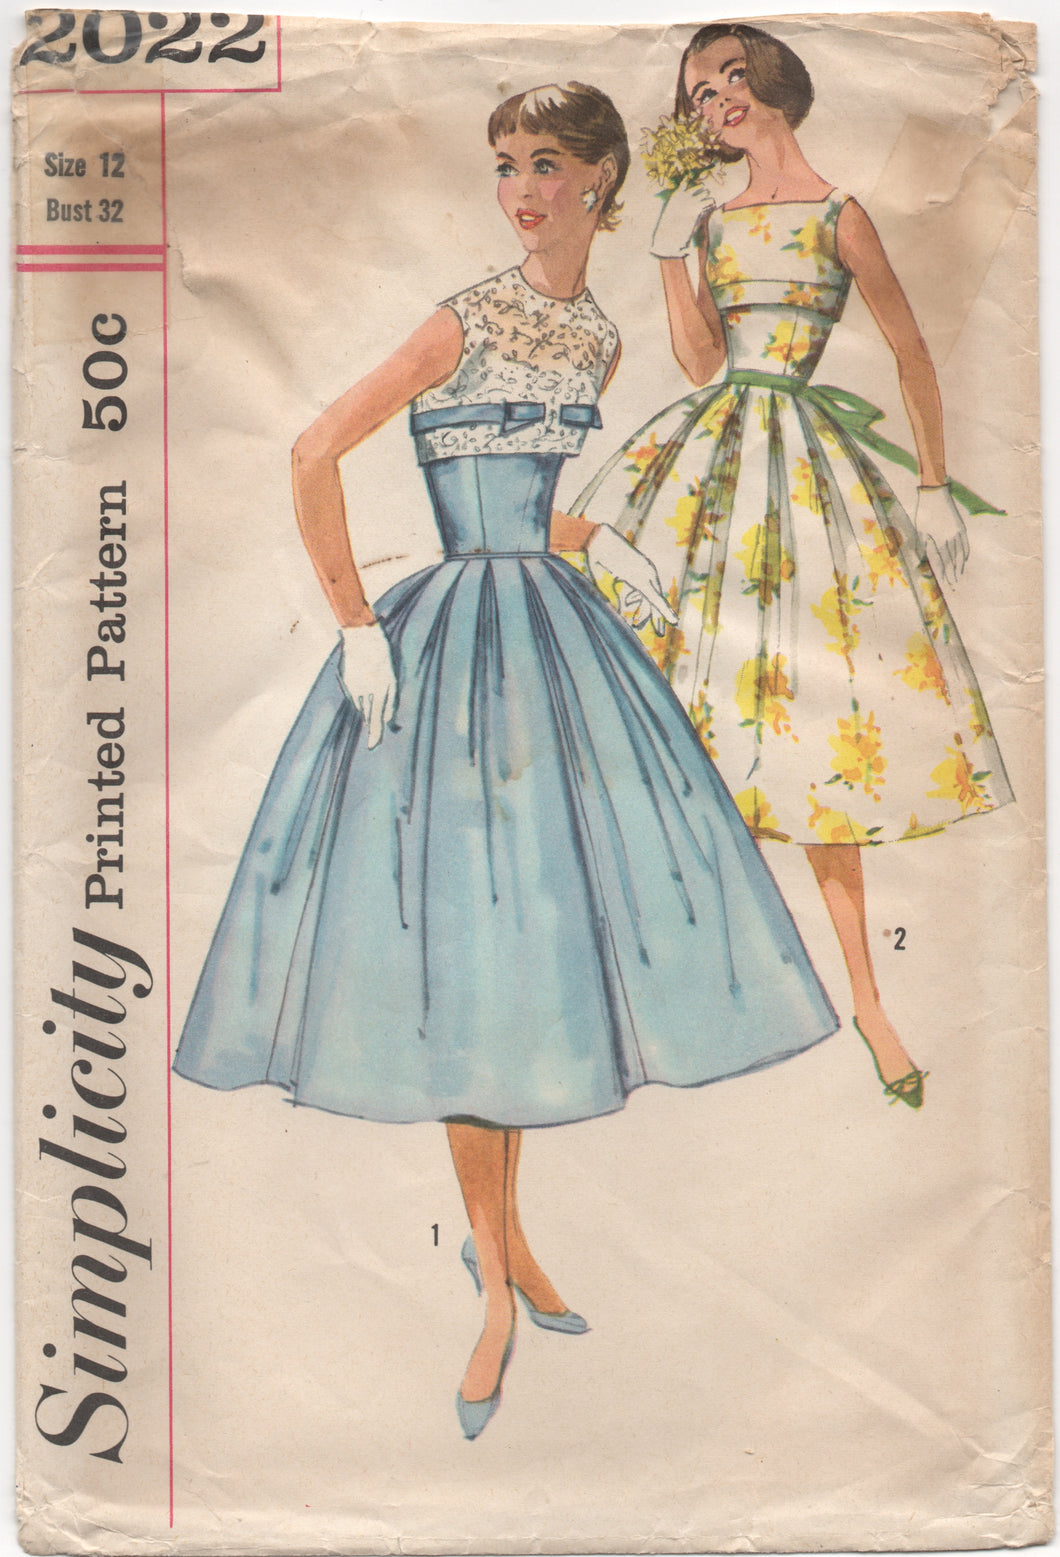 1950's Simplicity One Piece Fit & Flare Dress with Fitted Waist with Mock Bolero - Bust 32